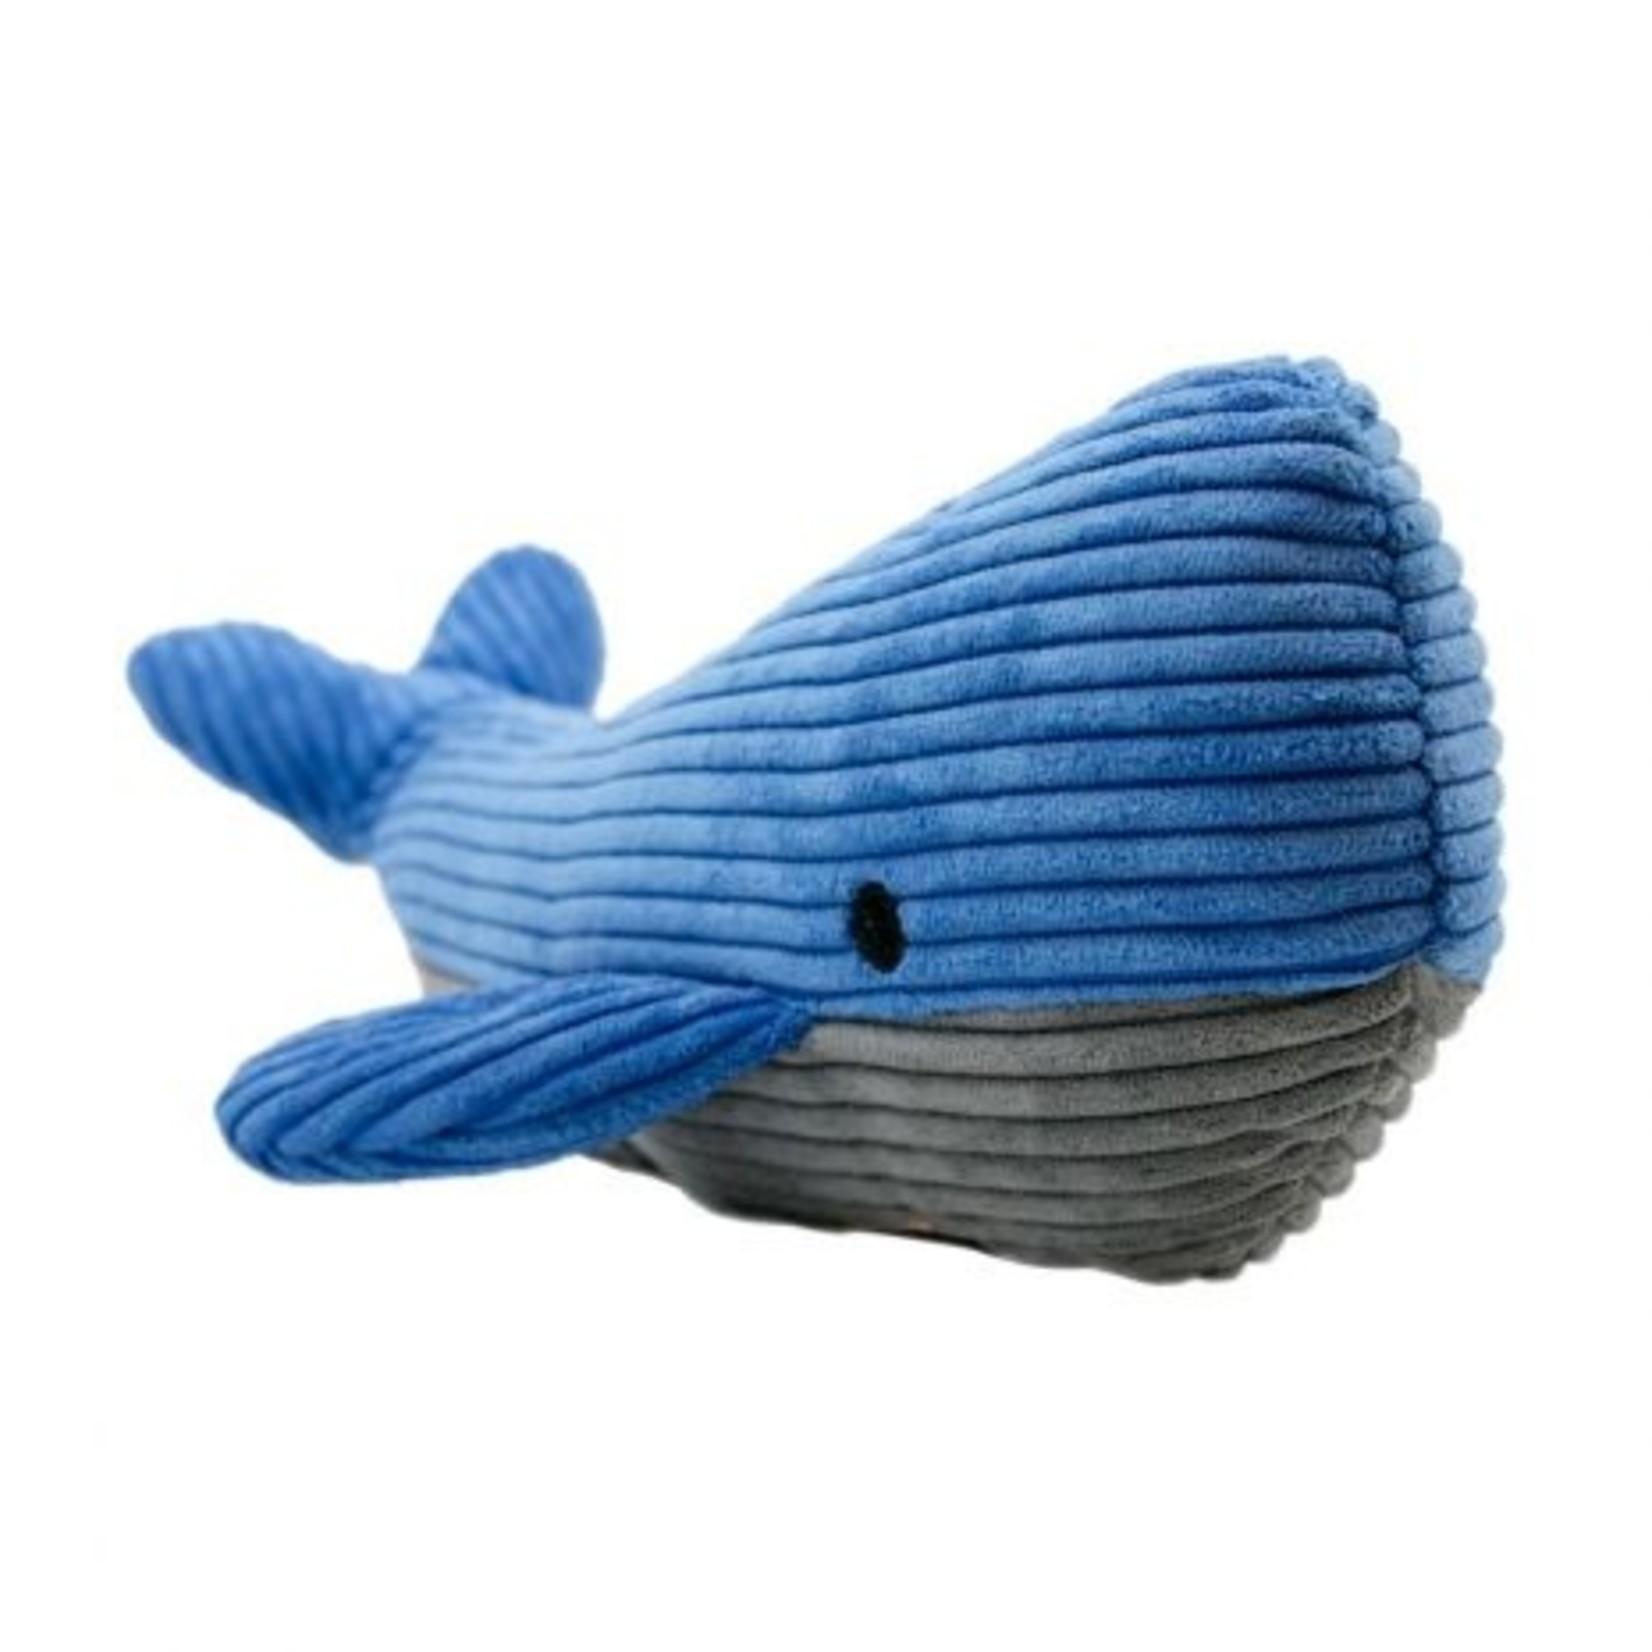 Tall Tails TALL TAILS Plush Whale Squeaker 14" Dog Toy